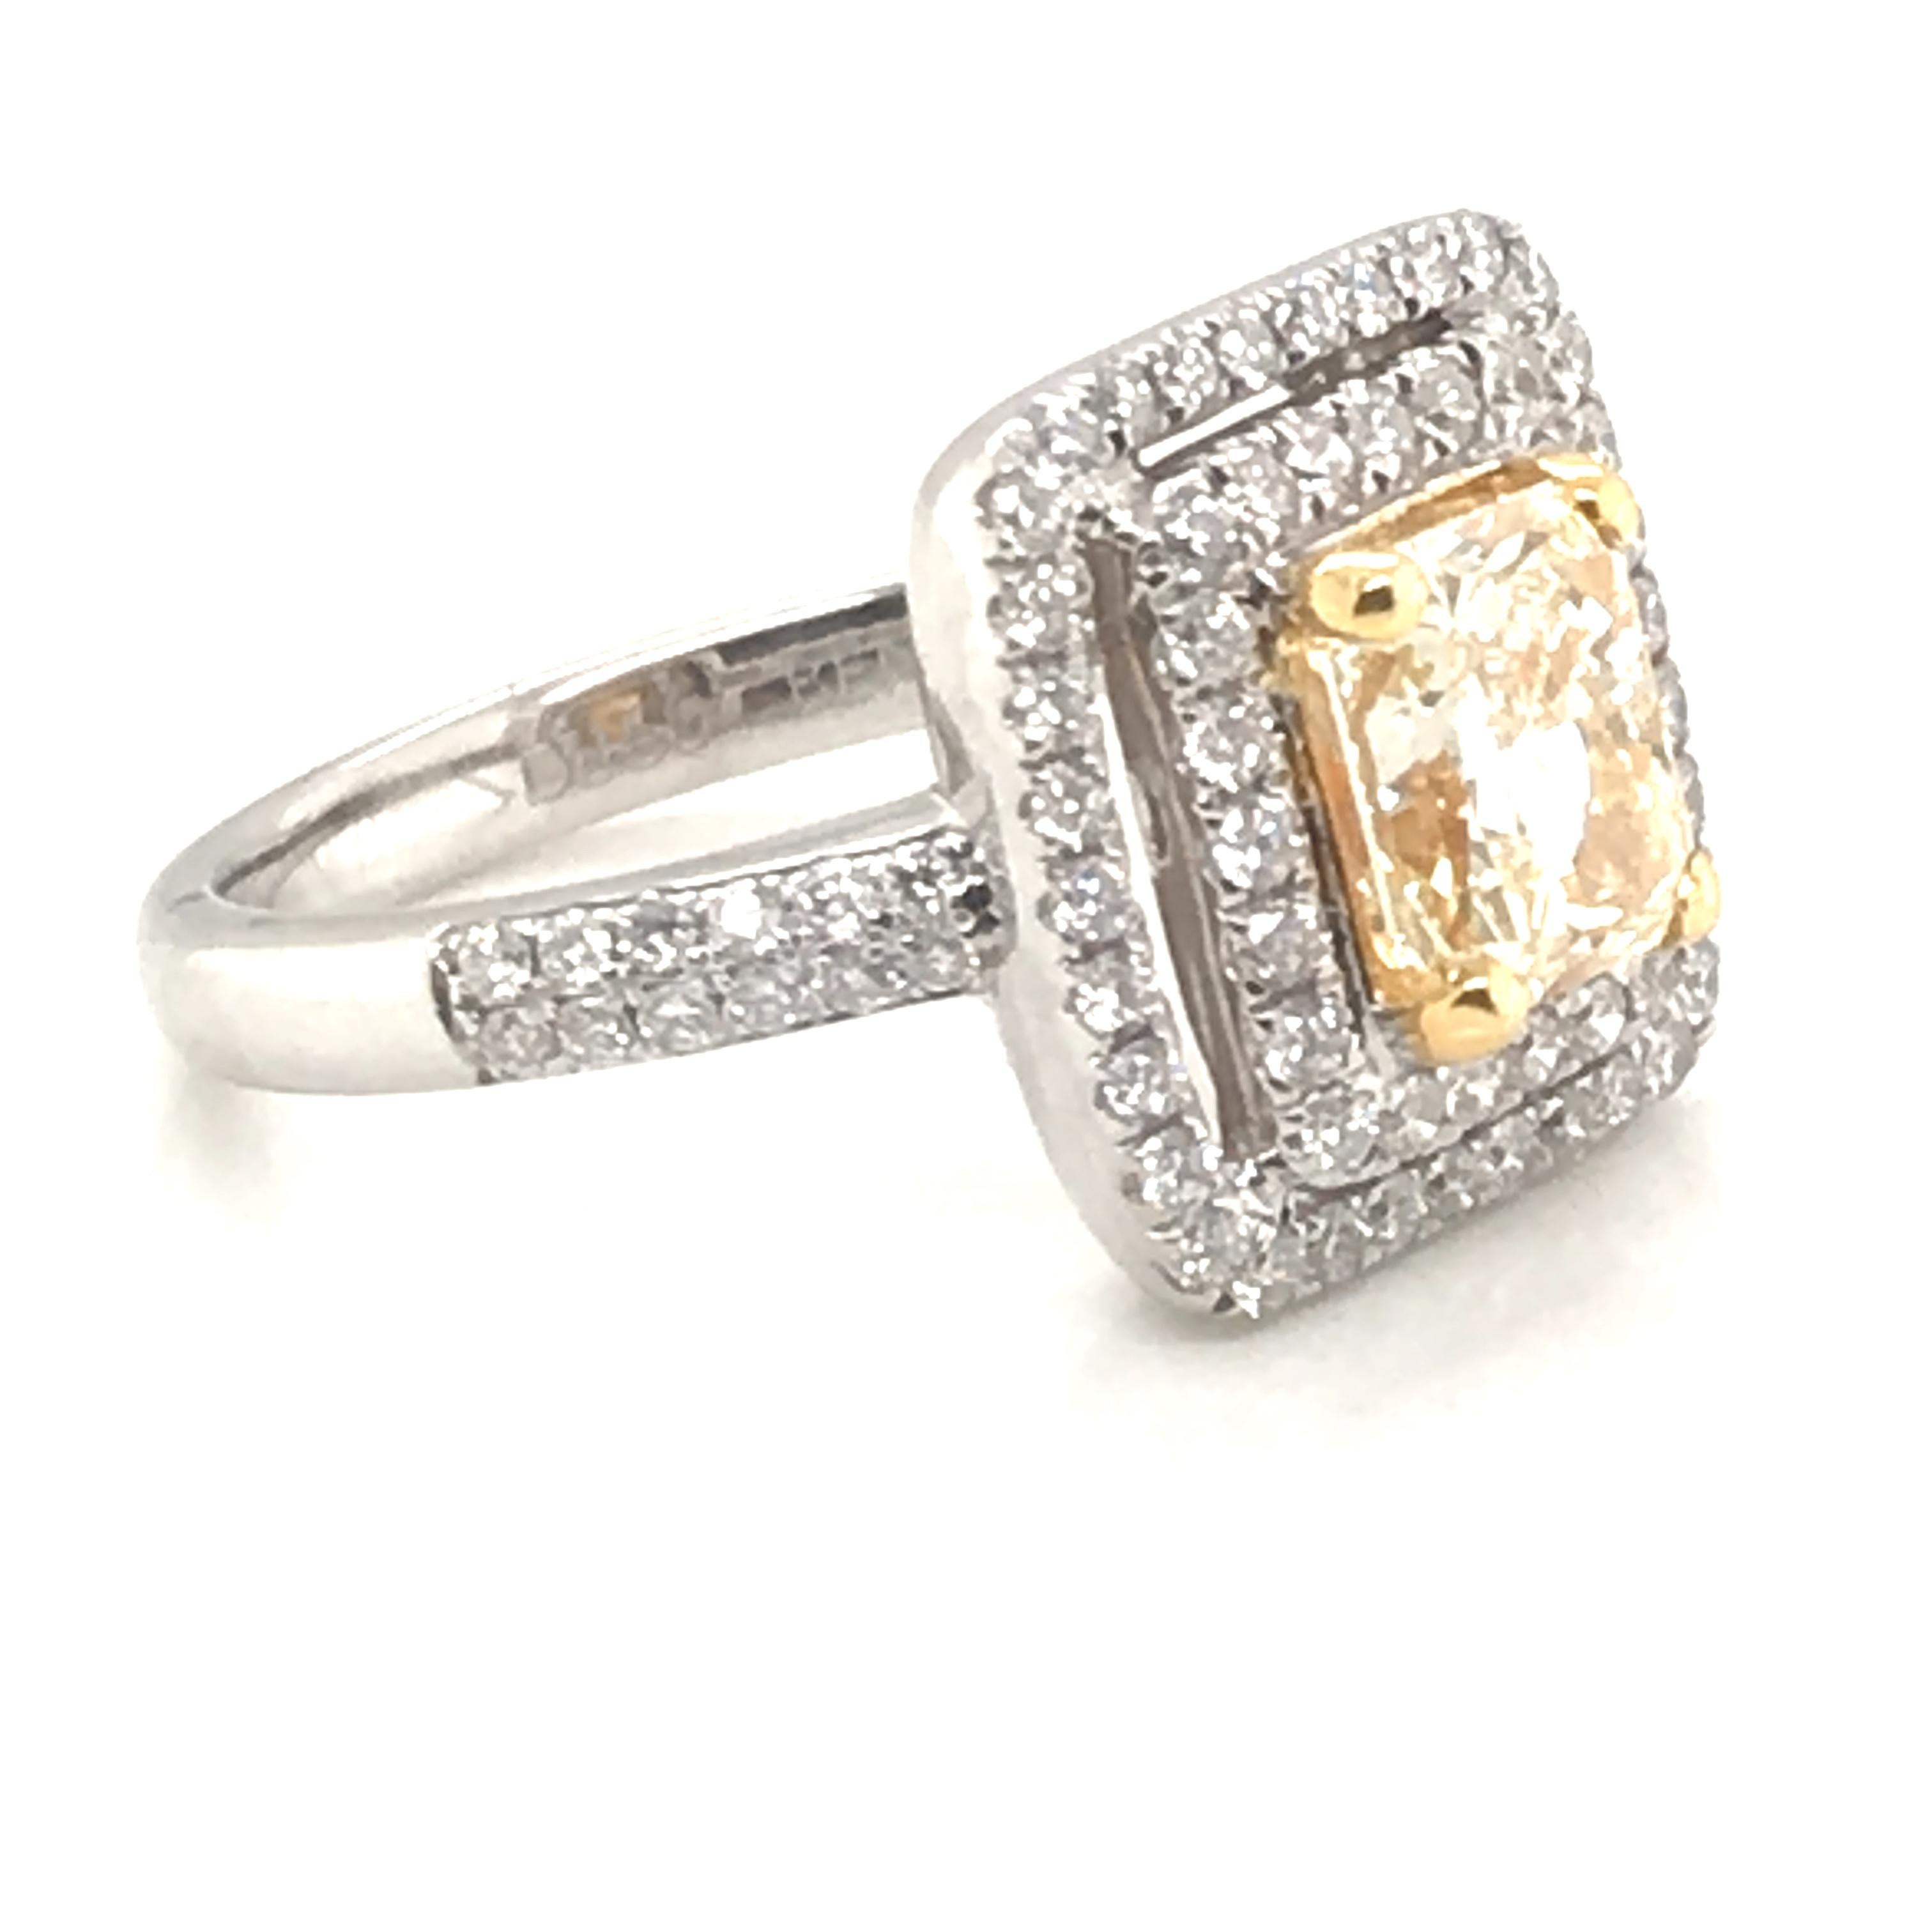 Modern 2.11 Carat Natural Fancy Yellow Diamond Ring with 18 Karat White and Yellow Gold For Sale